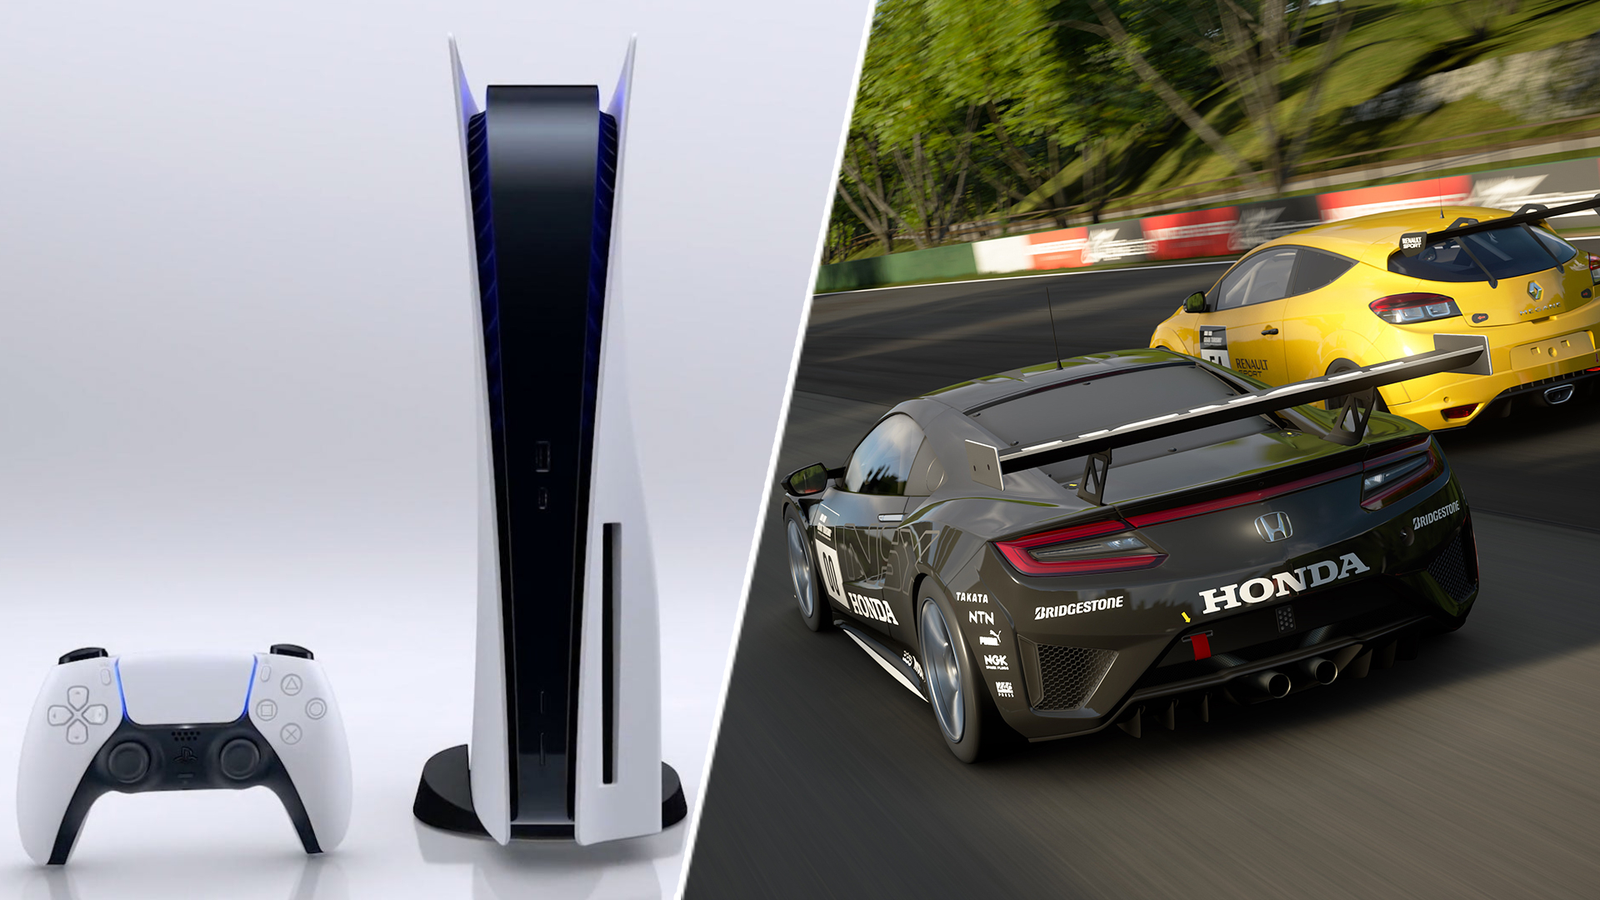 Gran Turismo 7 Confirmed as PlayStation VR2 Launch Day Title – GTPlanet